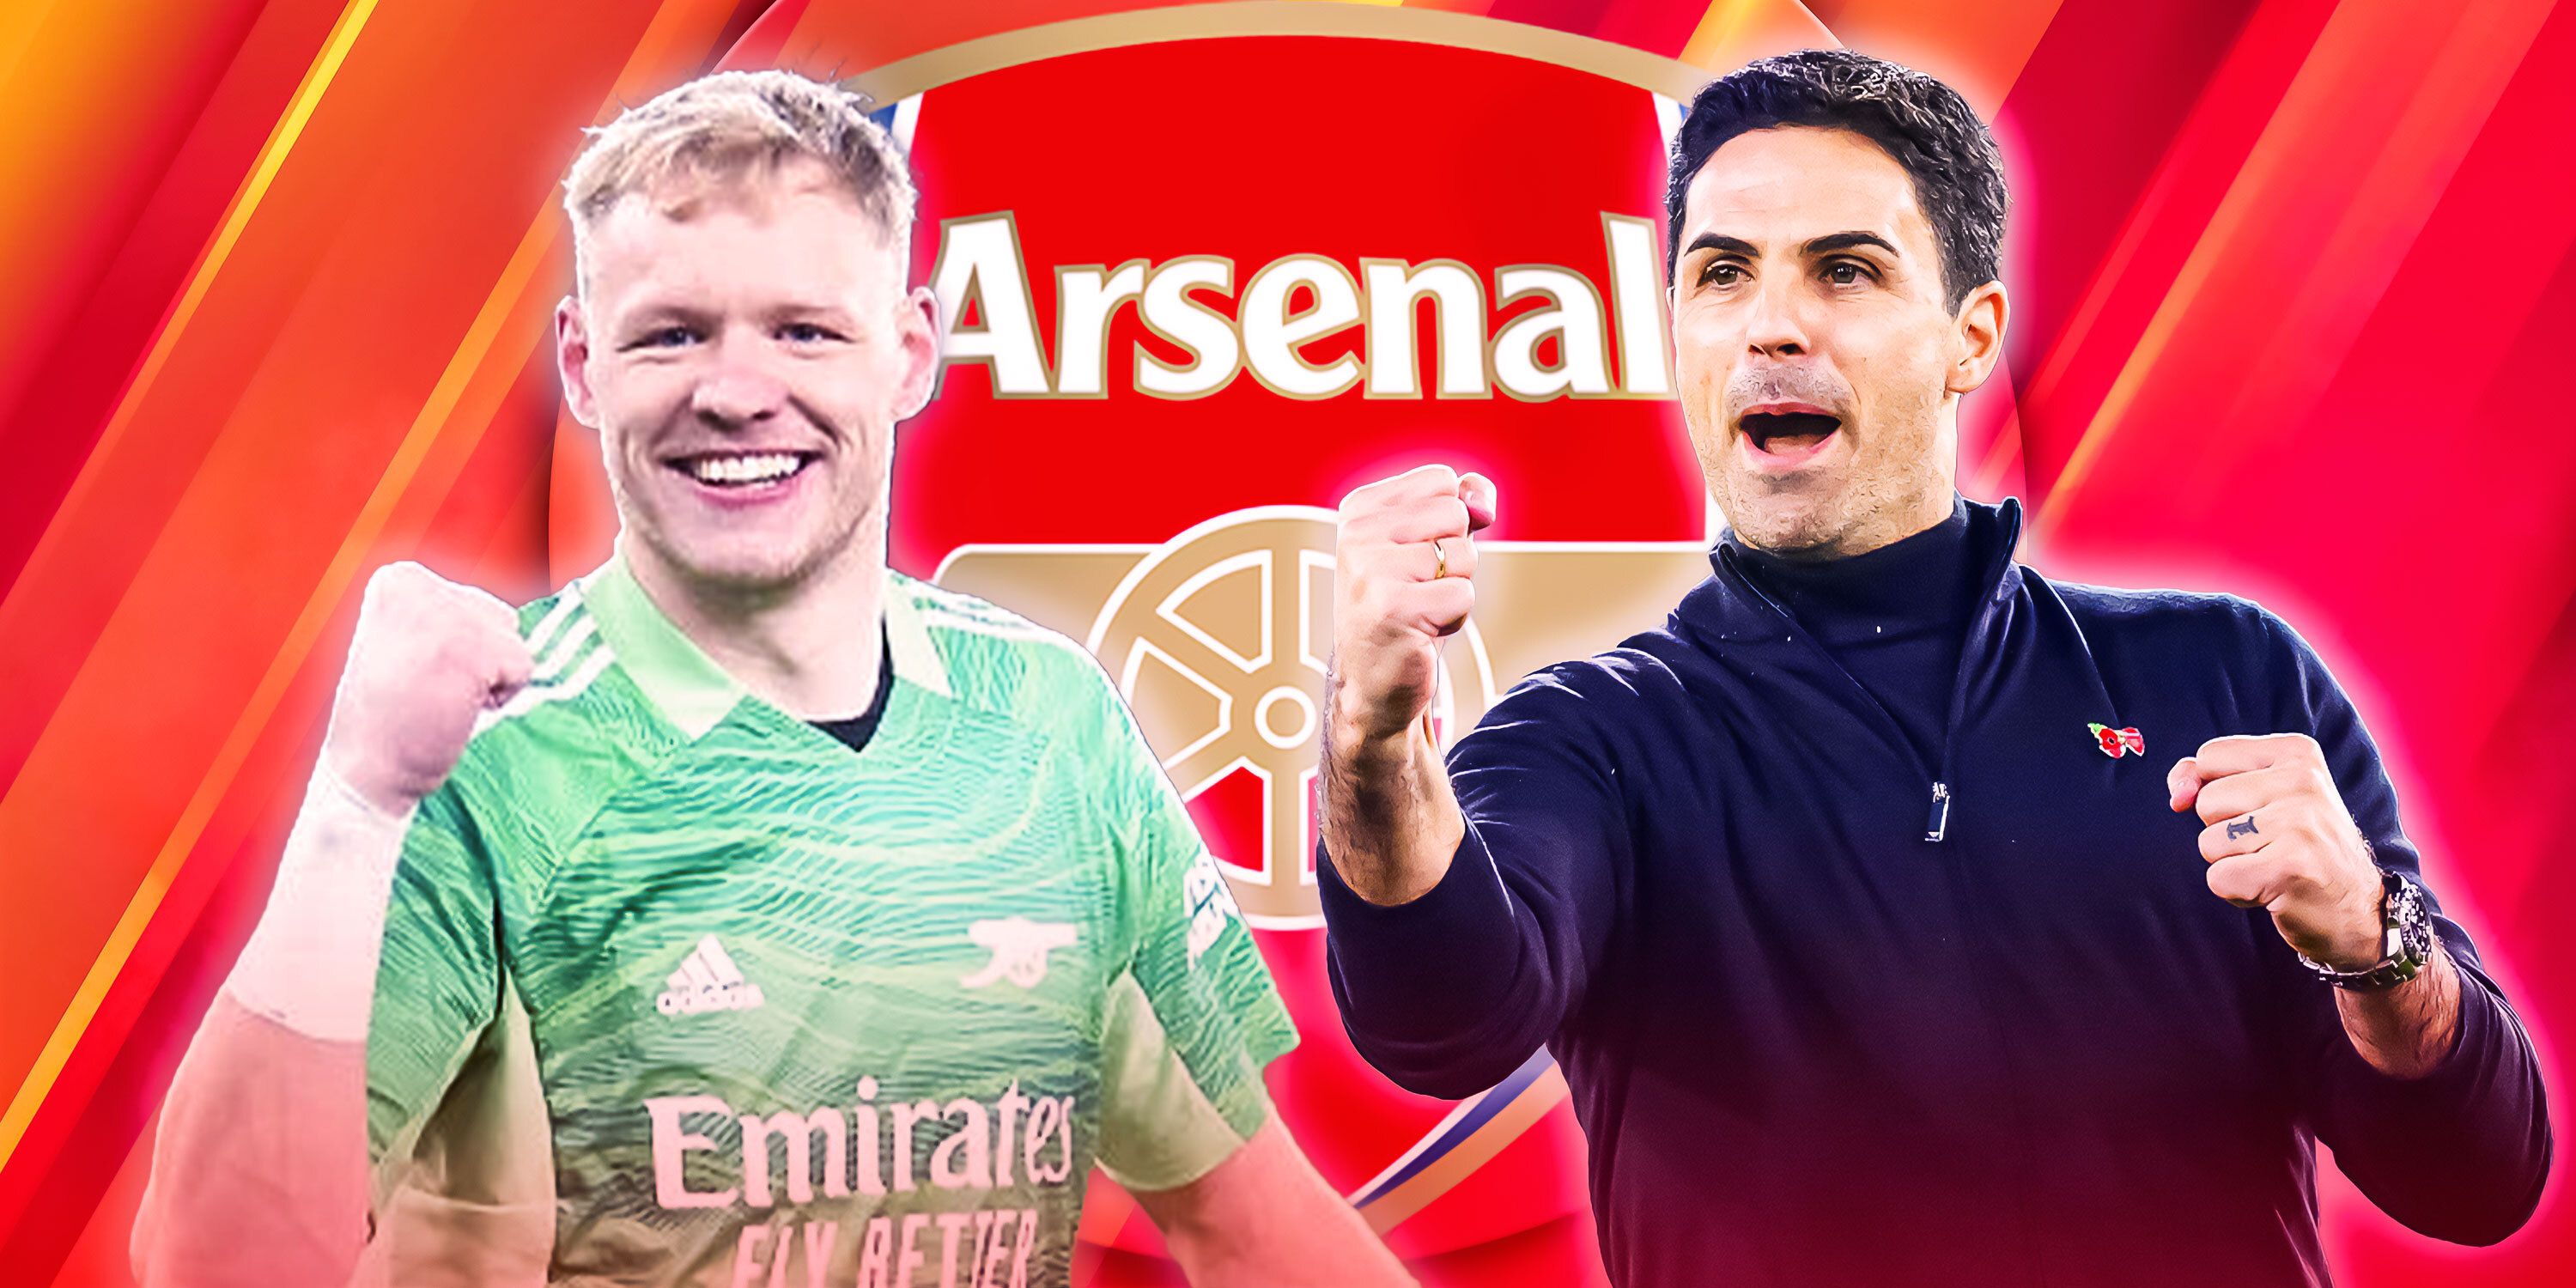 Arsenal goalkeeper Aaron Ramsdale and boss Mikel Arteta celebrating in front of the Gunners' badge